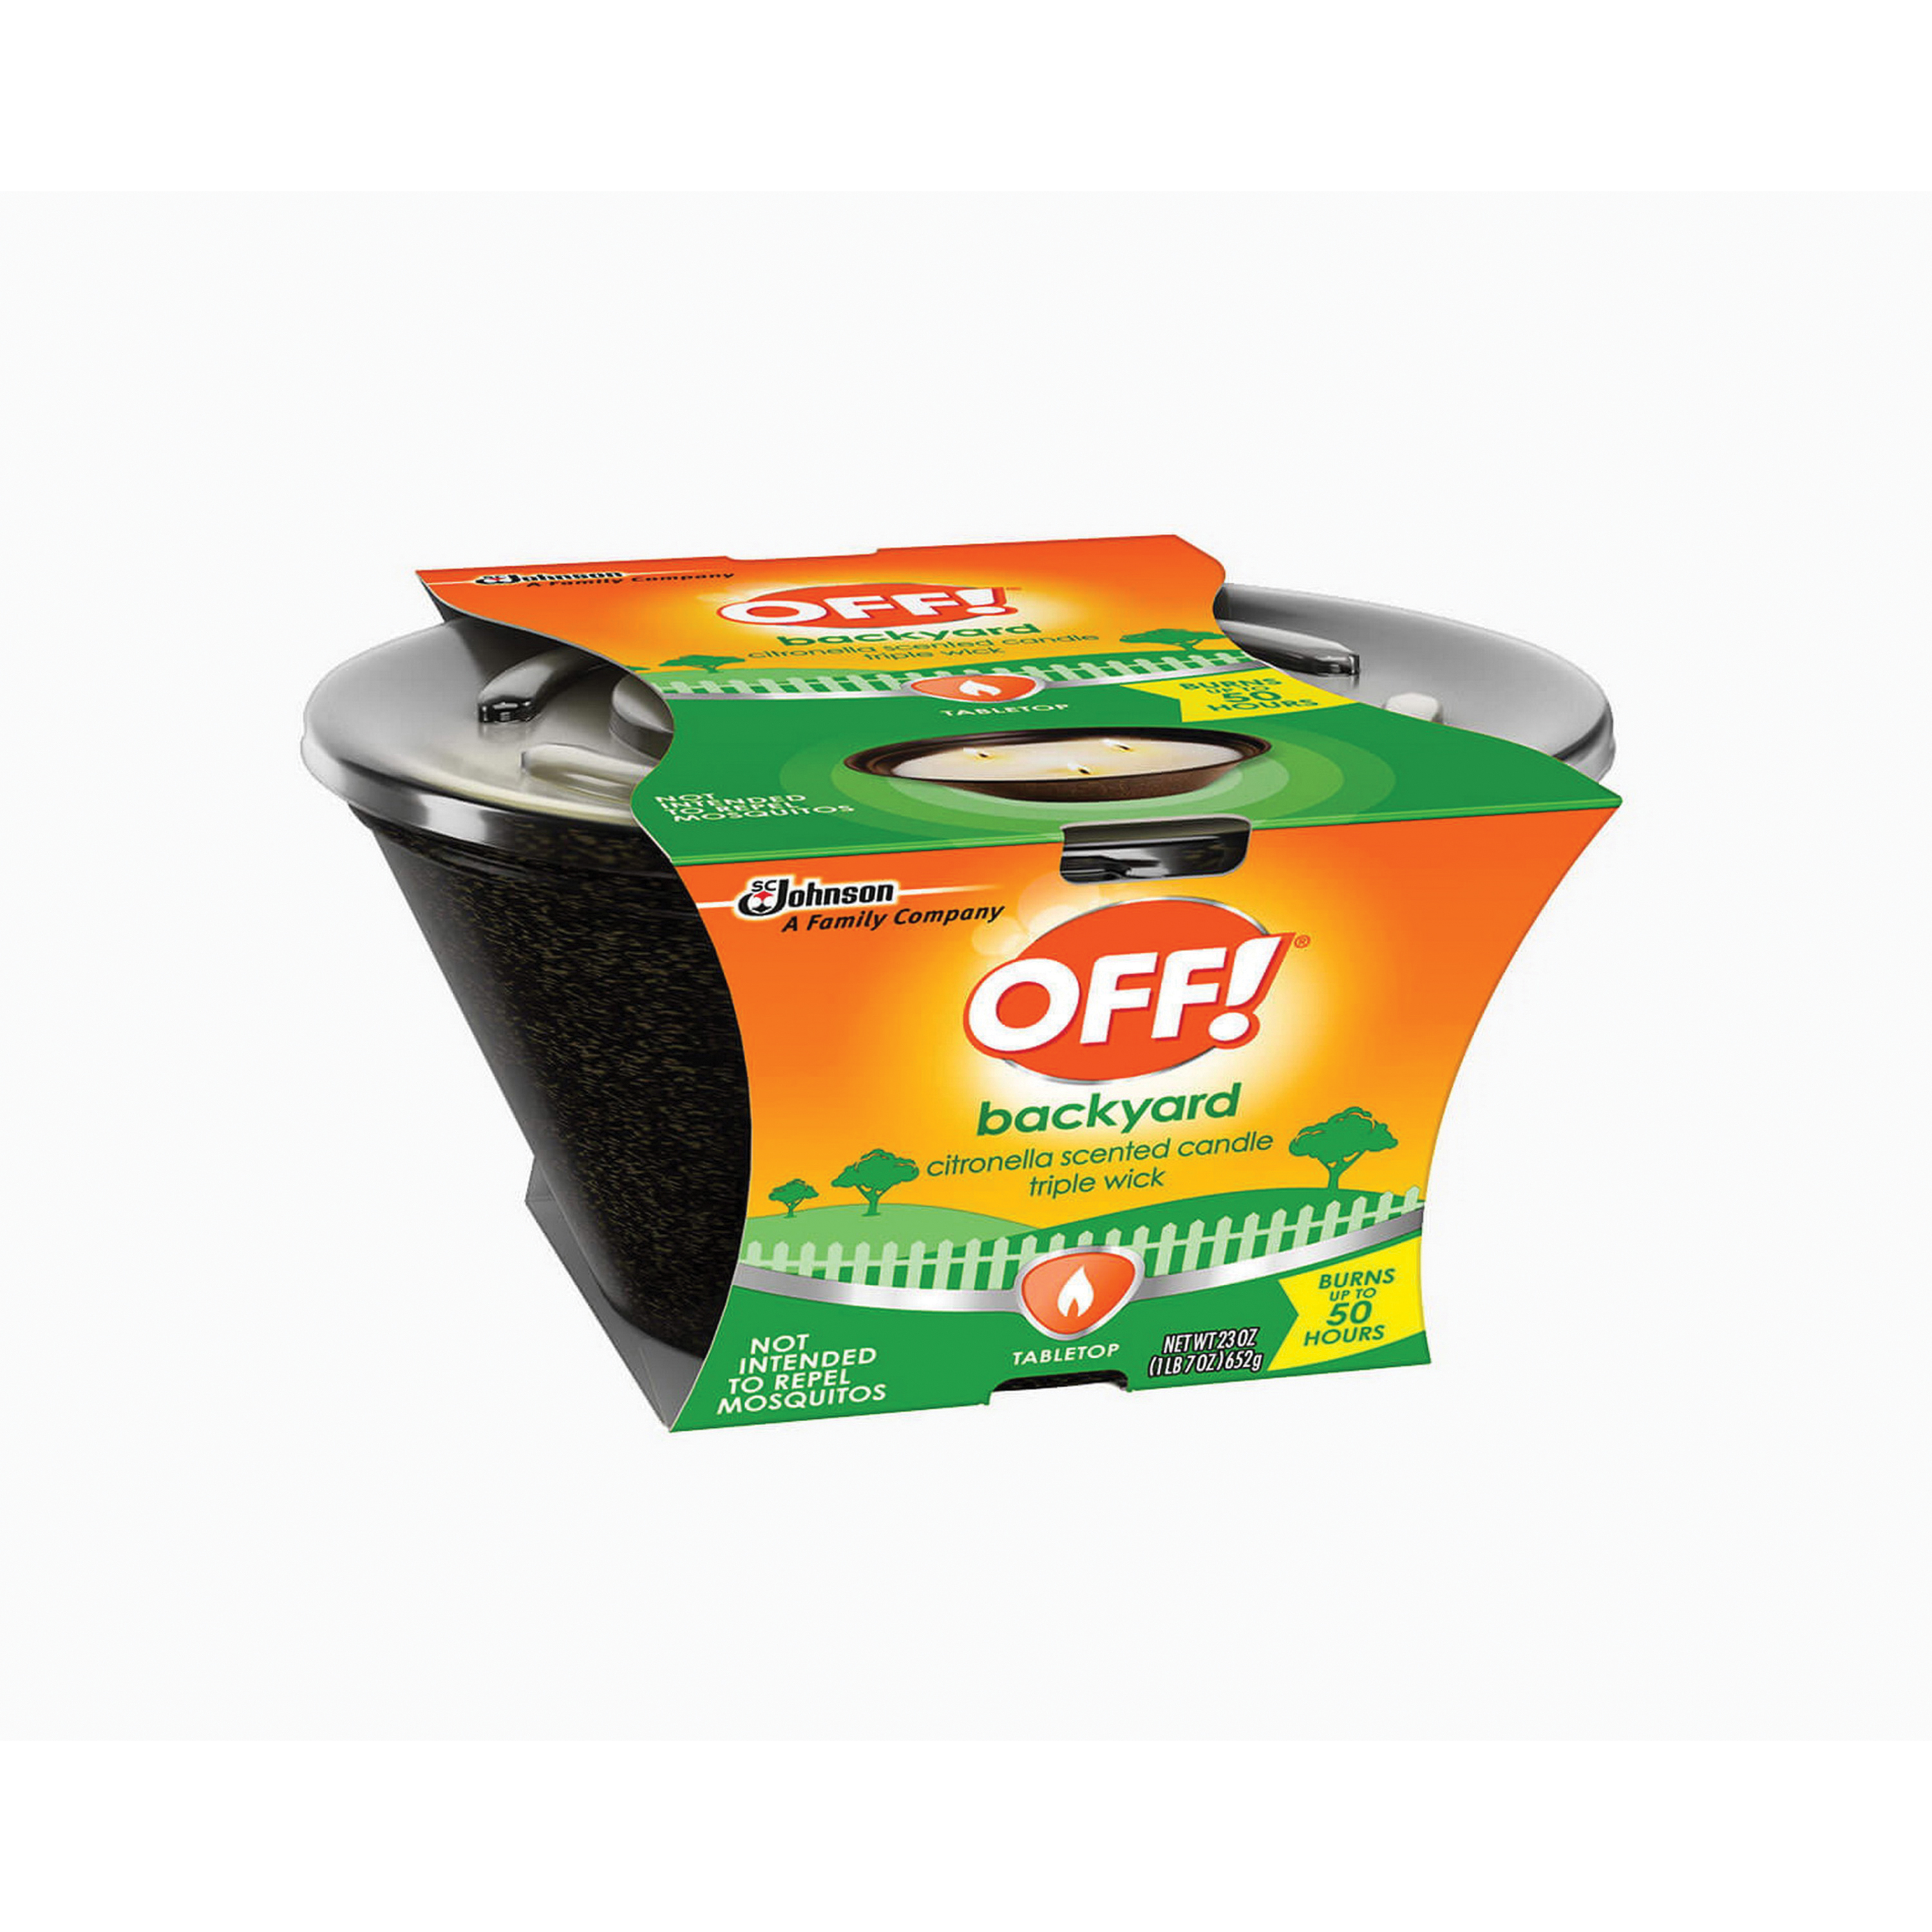 OFF! 71170 Air Freshener Candle, 23 oz Candle, Citronella Fragrance, Up to 50 hr Burning - 3